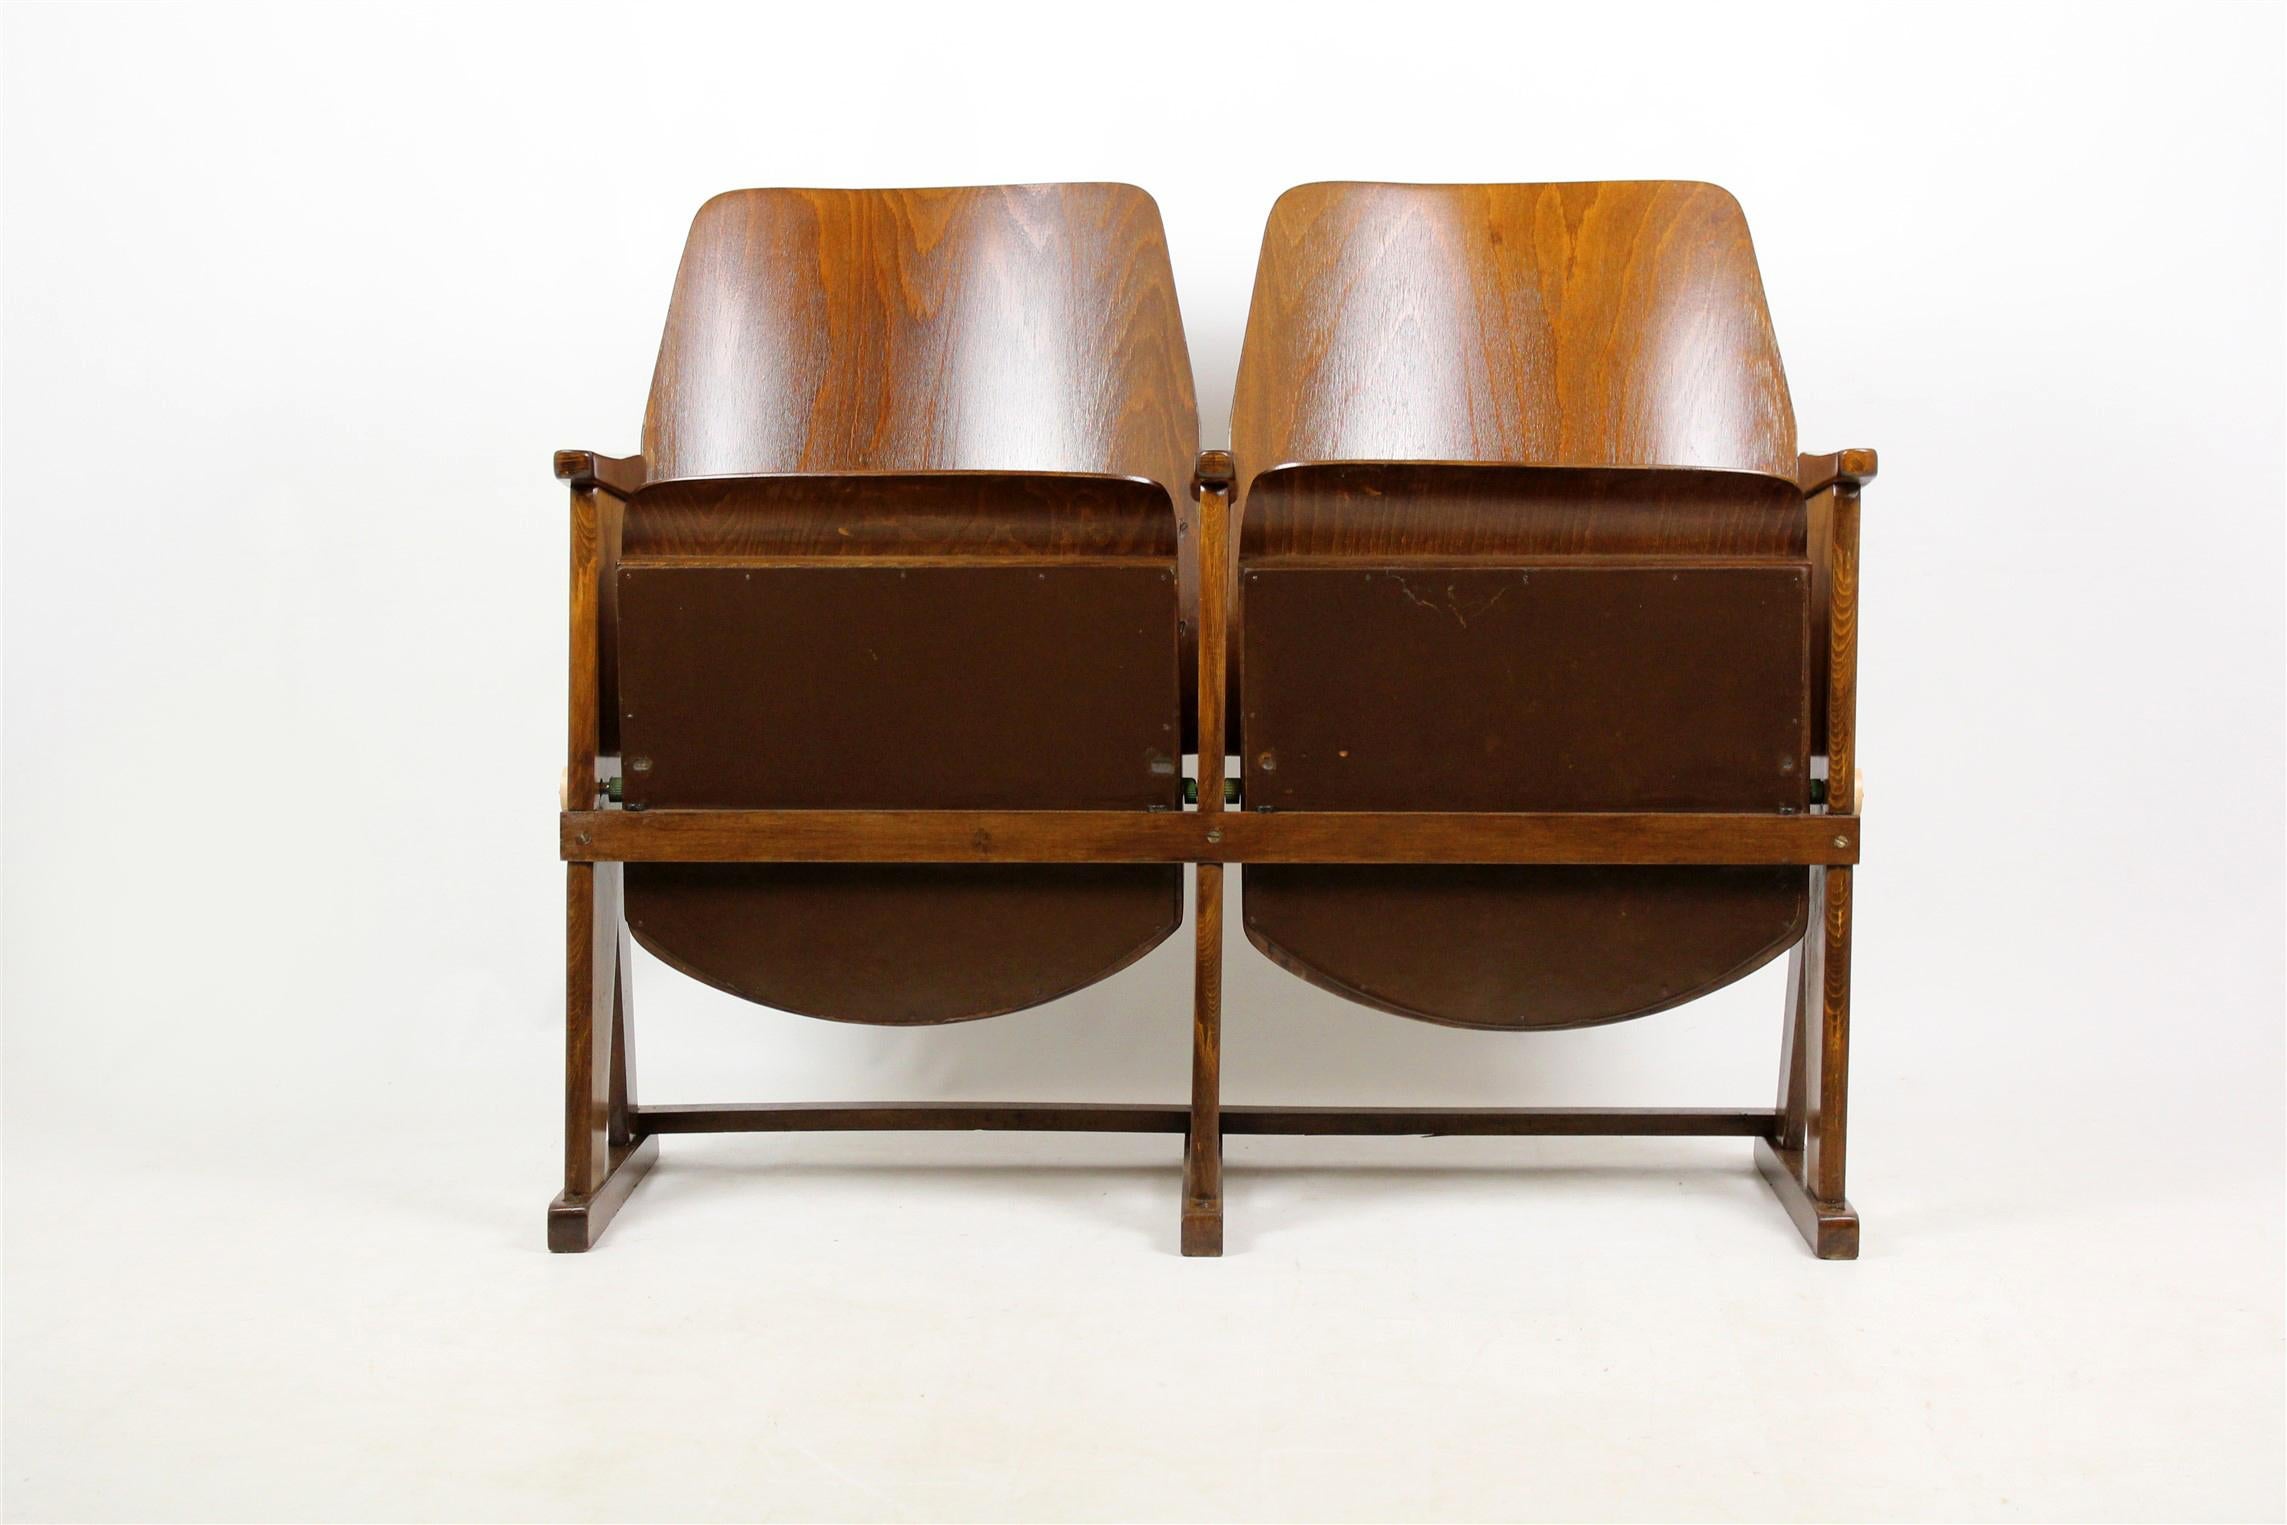 Original cinema seats from TON (Thonet), mid-1960s. Chairs are made of beech wood and bent plywood,
Preserved in original, very good condition, small traces of passing years (scratches etc.), stable and fully functional.
On request more chairs